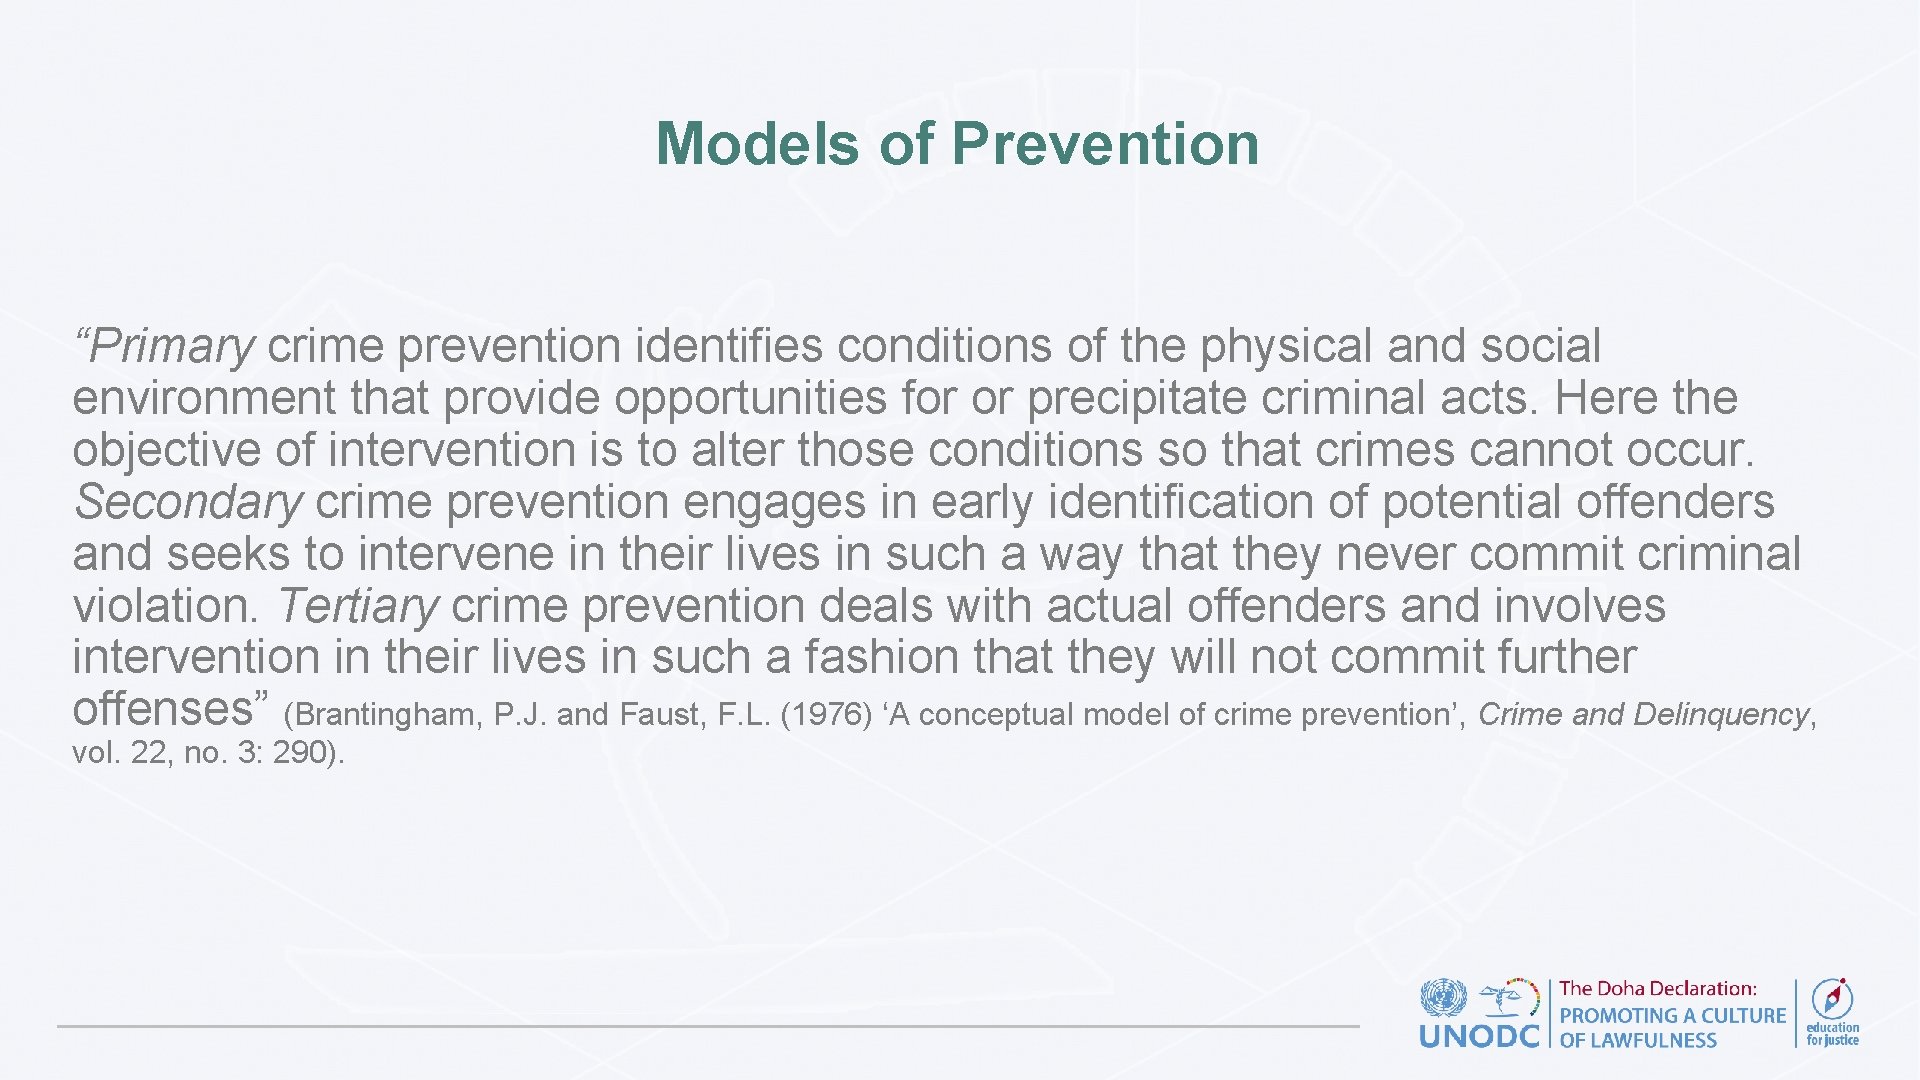 Models of Prevention “Primary crime prevention identifies conditions of the physical and social environment